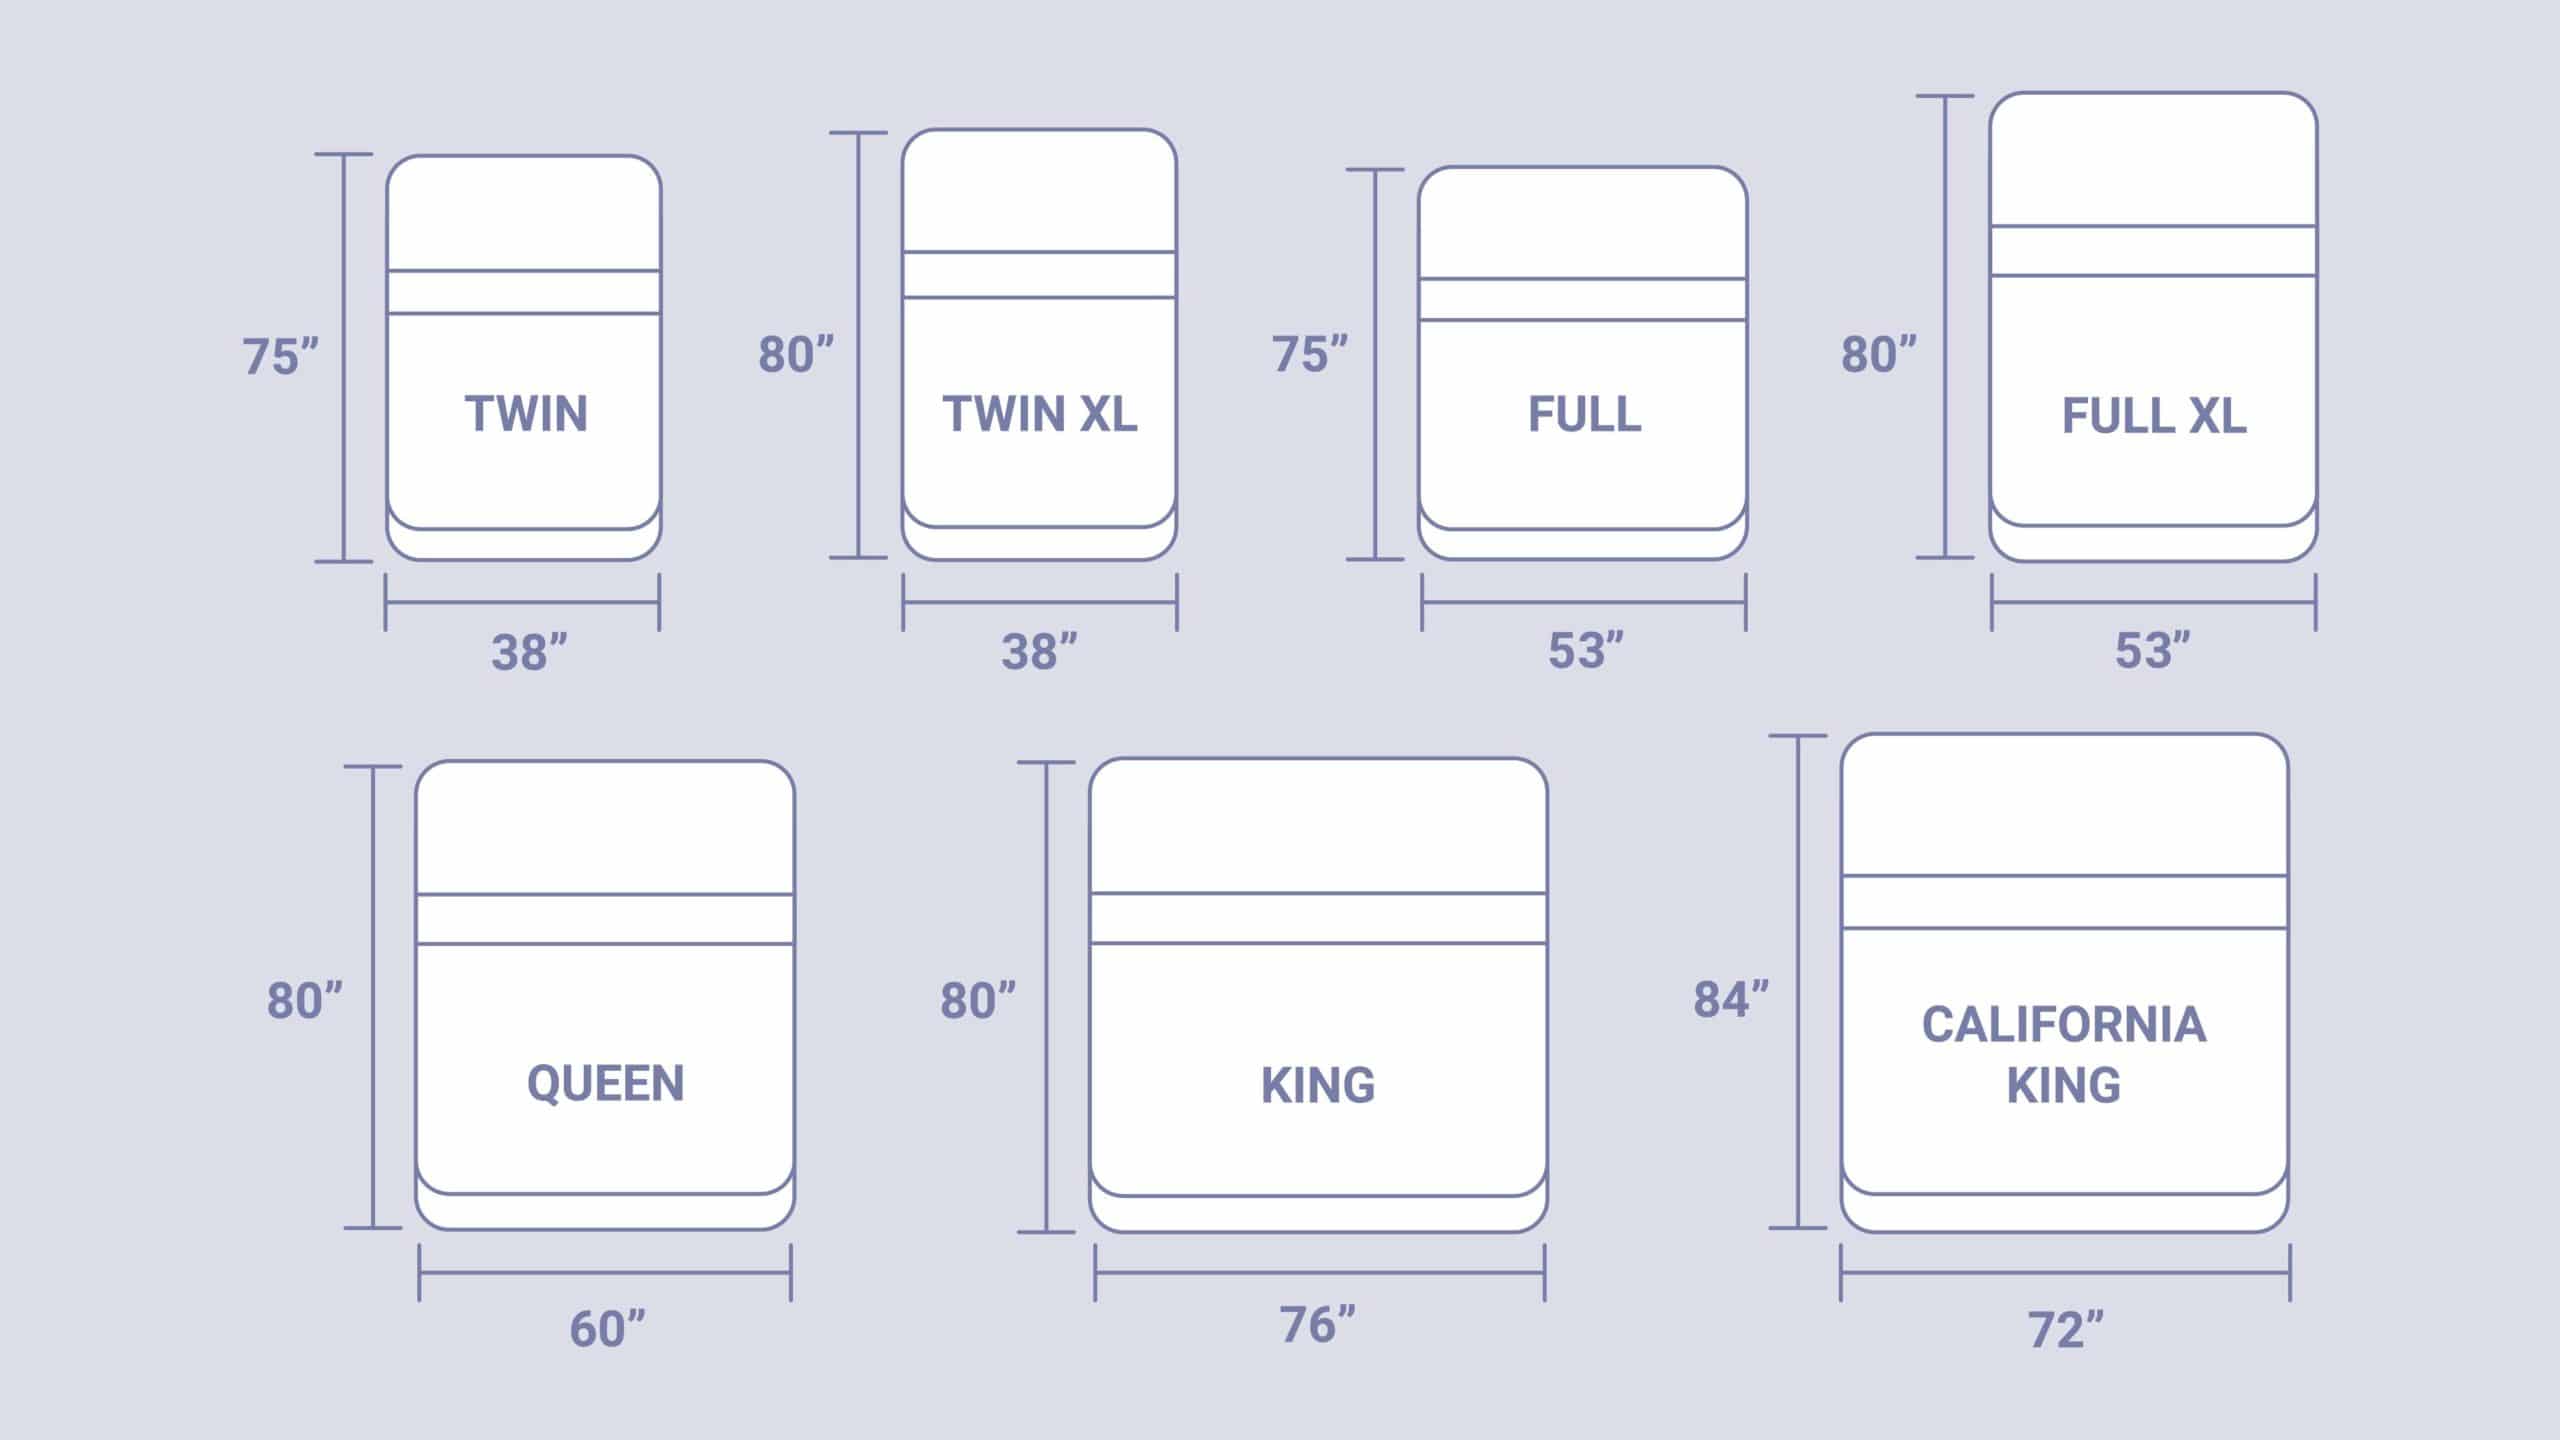 Mattress Sizes And Dimensions Guide, How Much Wider Is A Cal King Bed Than Queen